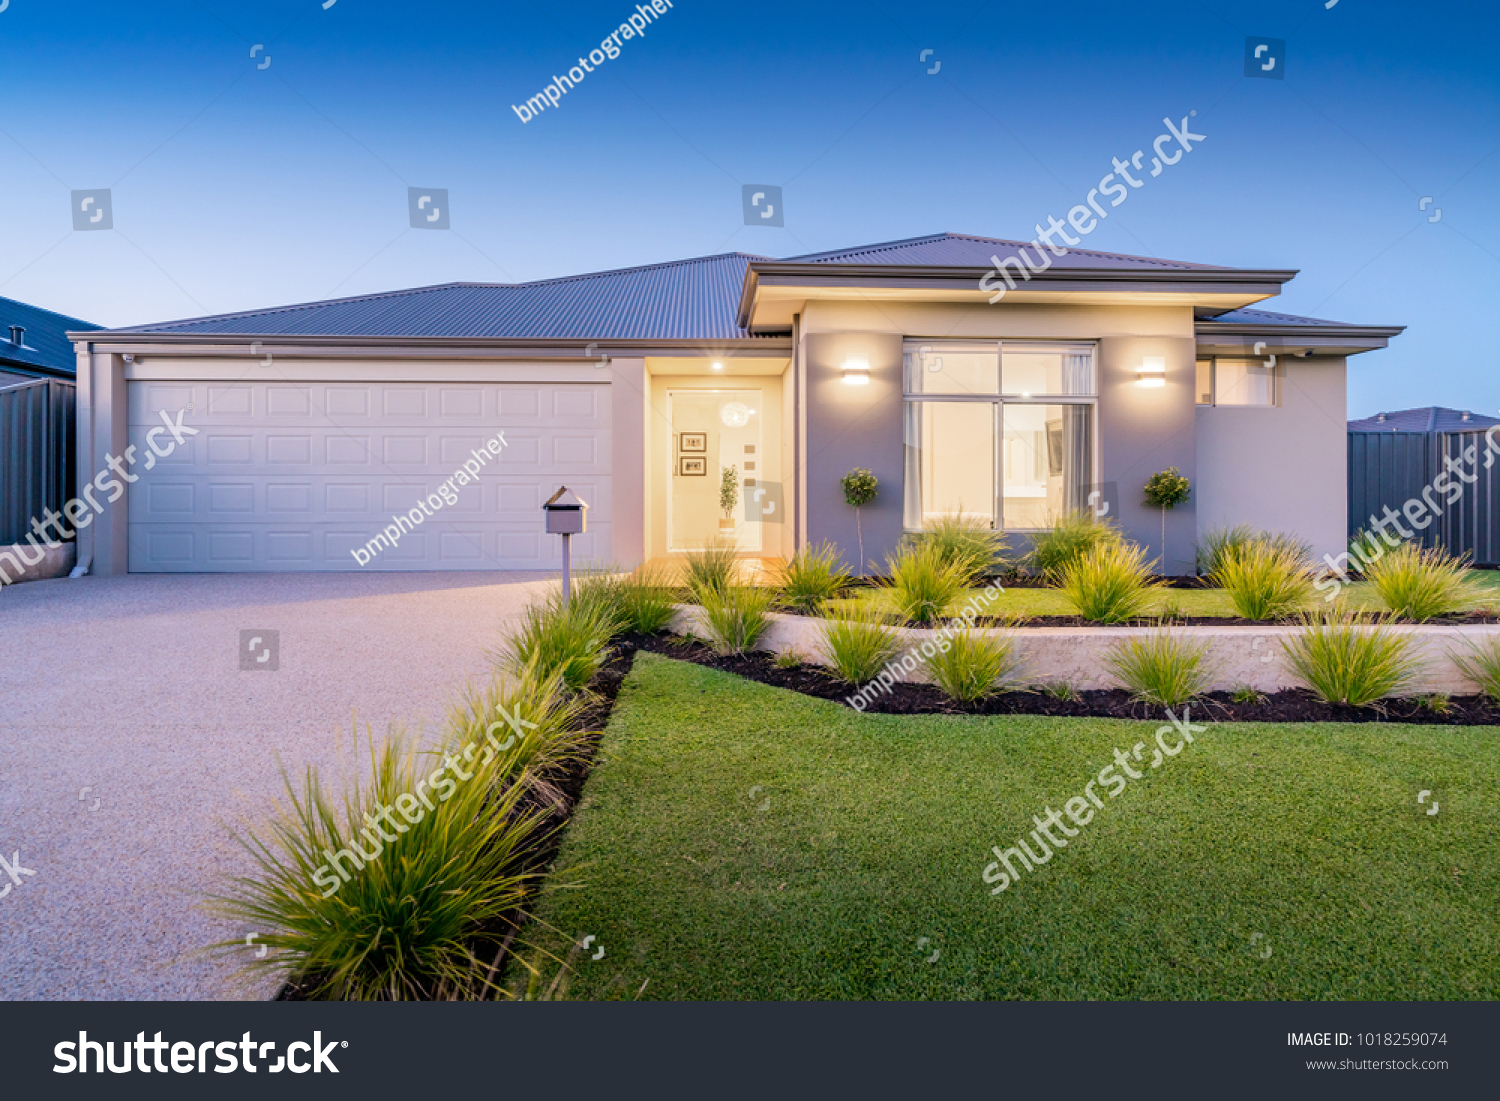 Front elevation / facade of a new modern Australian style home. #1018259074